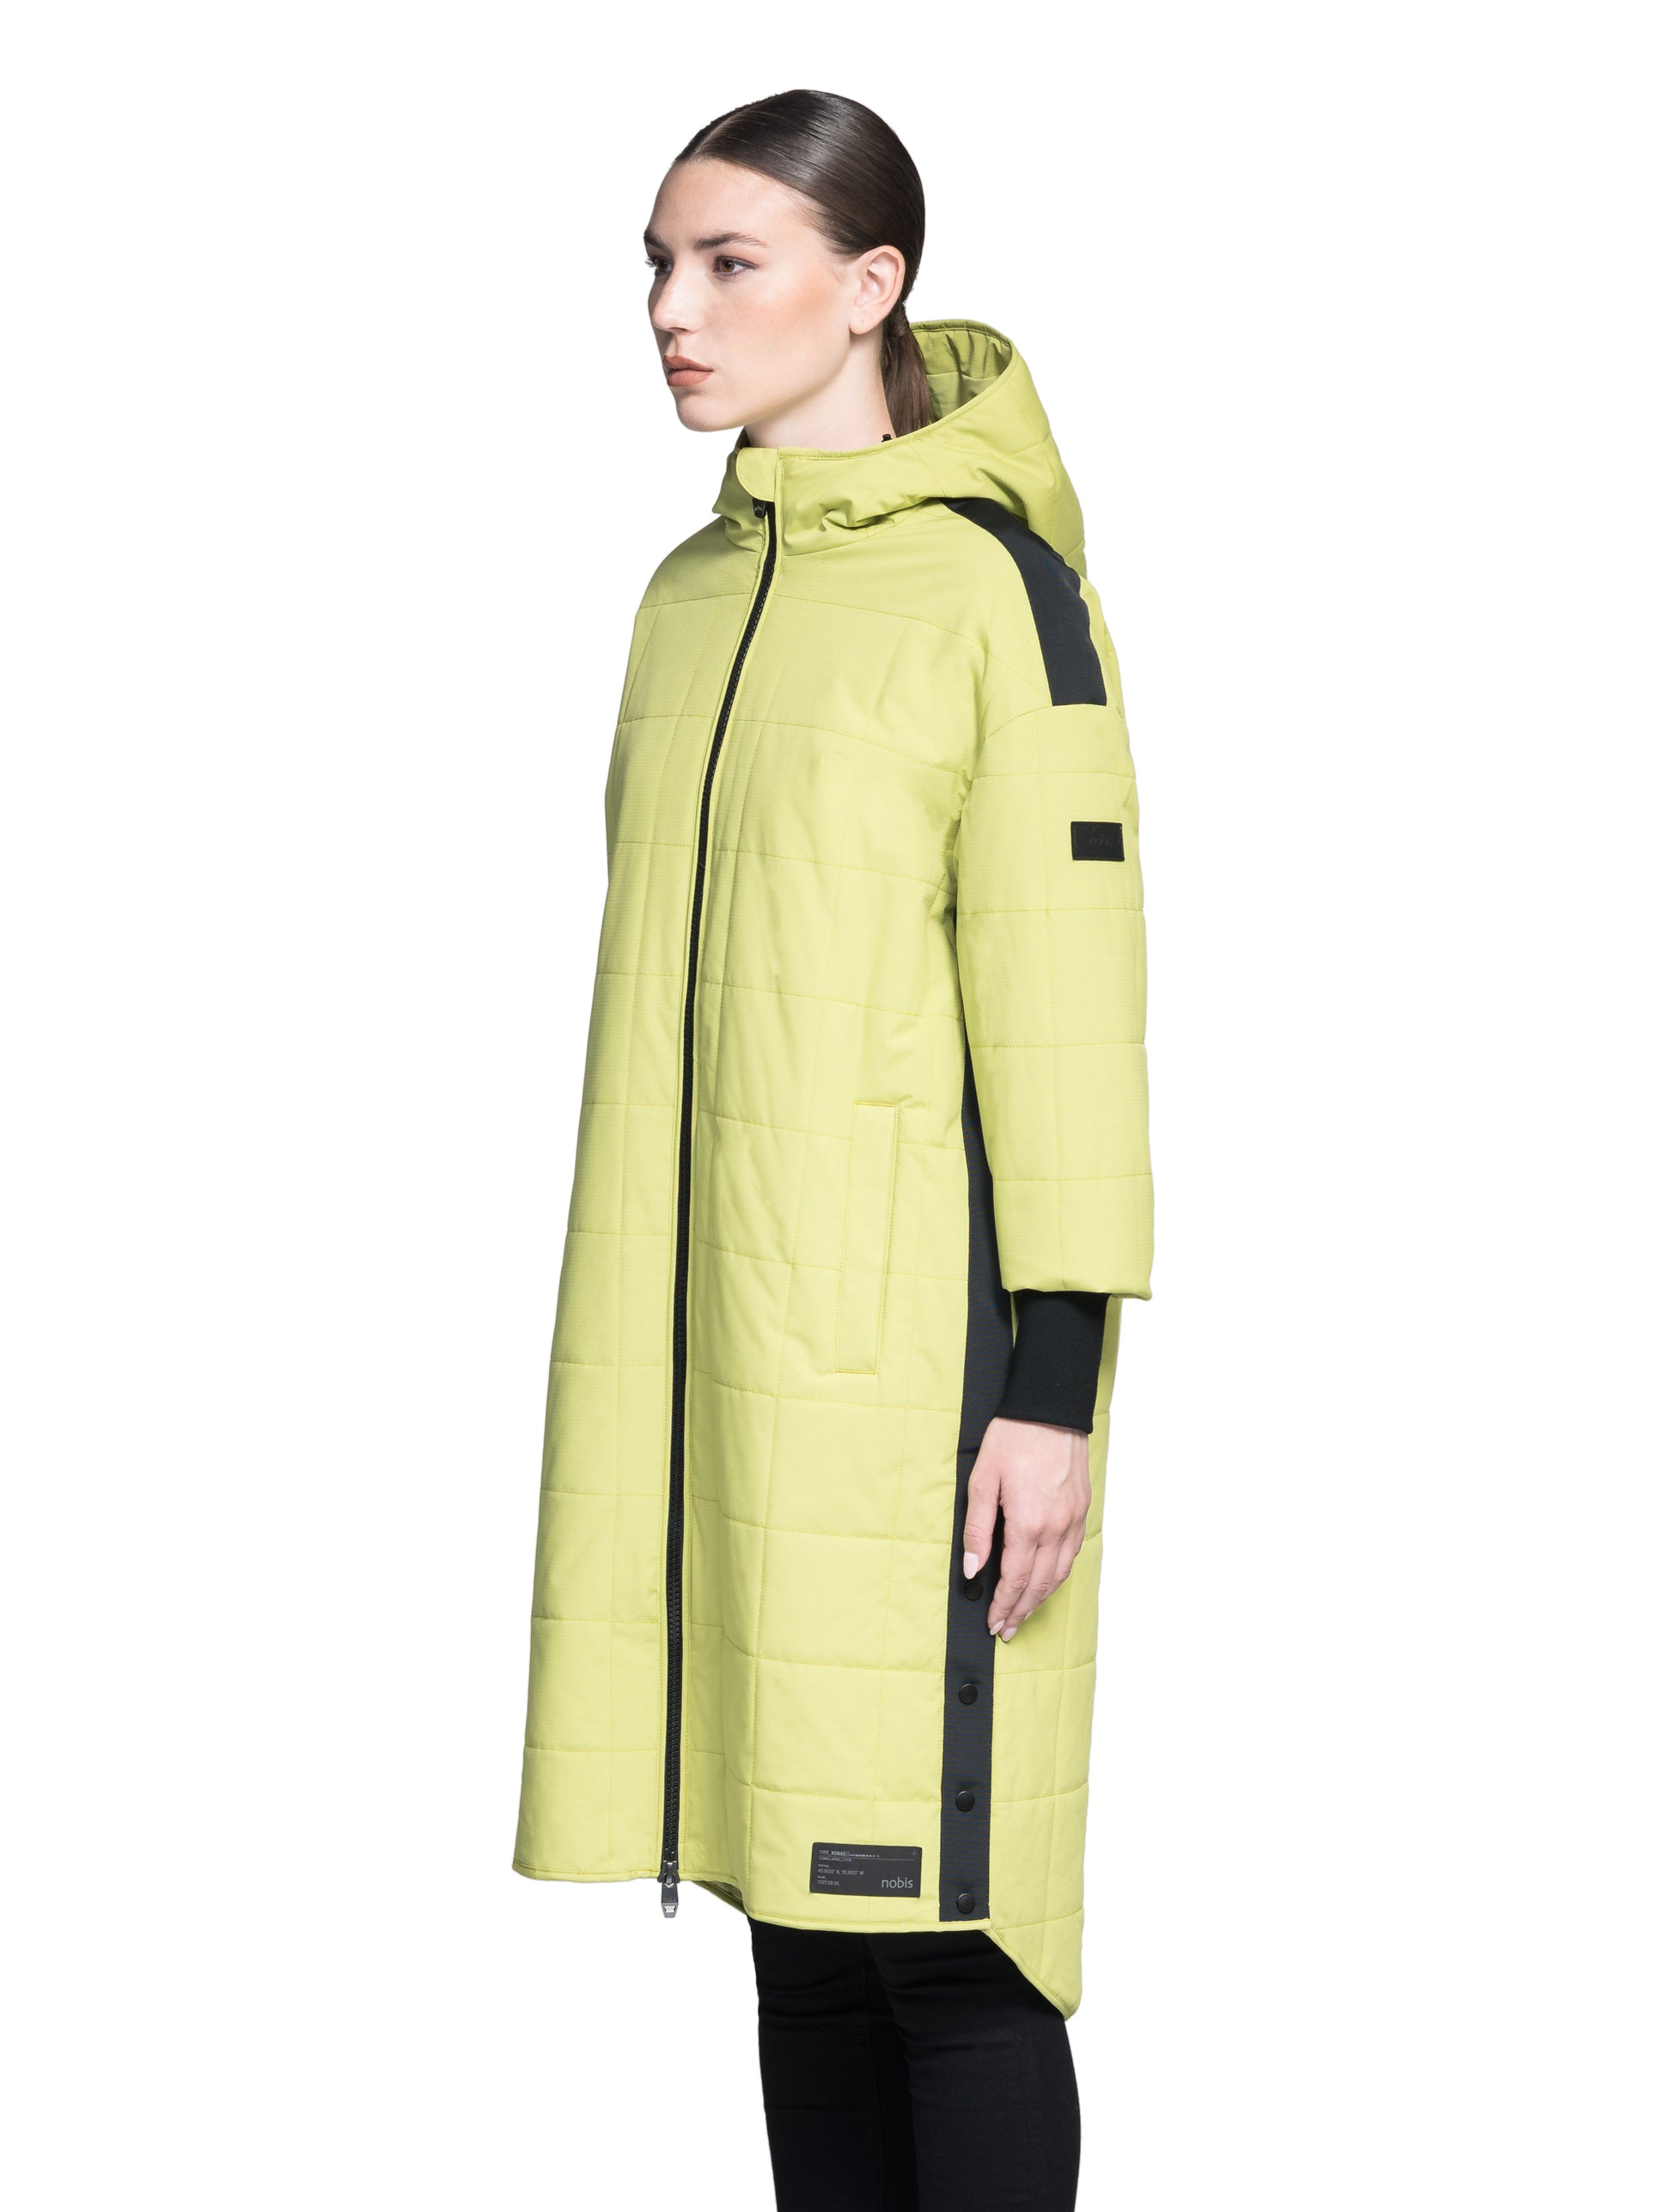 Radar Women's Performance Long Midlayer Jacket in long length, premium stretch ripstop and stretch Toray nylon fabrication, premium 4-way stretch, water resistant Primaloft Gold Insulation Active+, non-removable hood with adjustable draw cord, 2-way branded zipper at centre front, single welt pockets with magnetic closure at hips, elongated ribbed cuffs, grosgrain ribbon detail at shoulder and side seams, and snap closure side seam vent, in Dark Citron